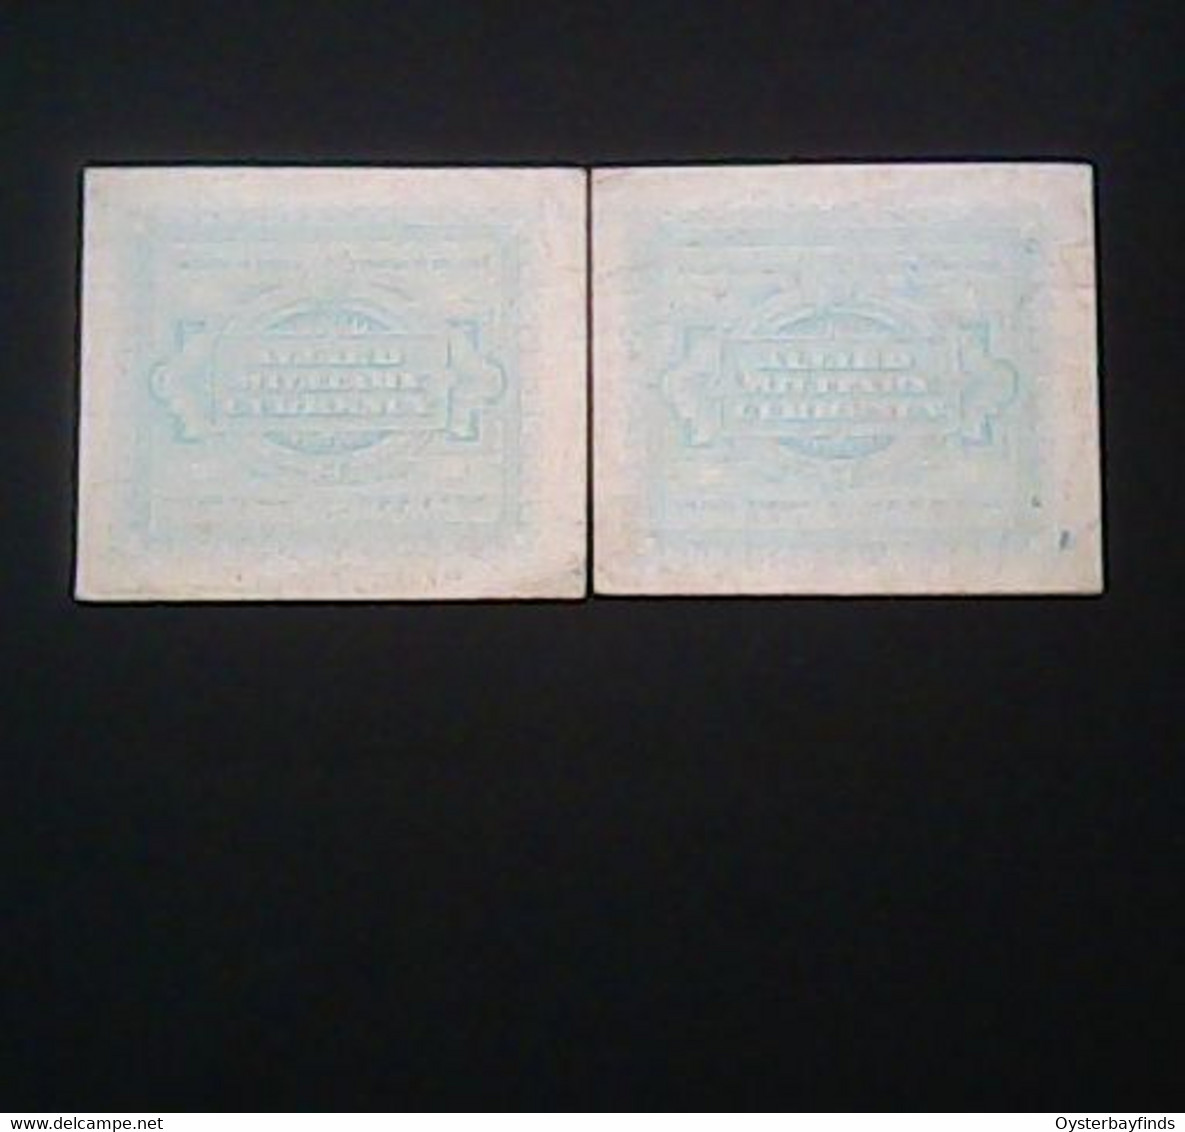 Italy 1943: 2 X 1 Lira With Consecutive Serial Numbers - Allied Occupation WWII